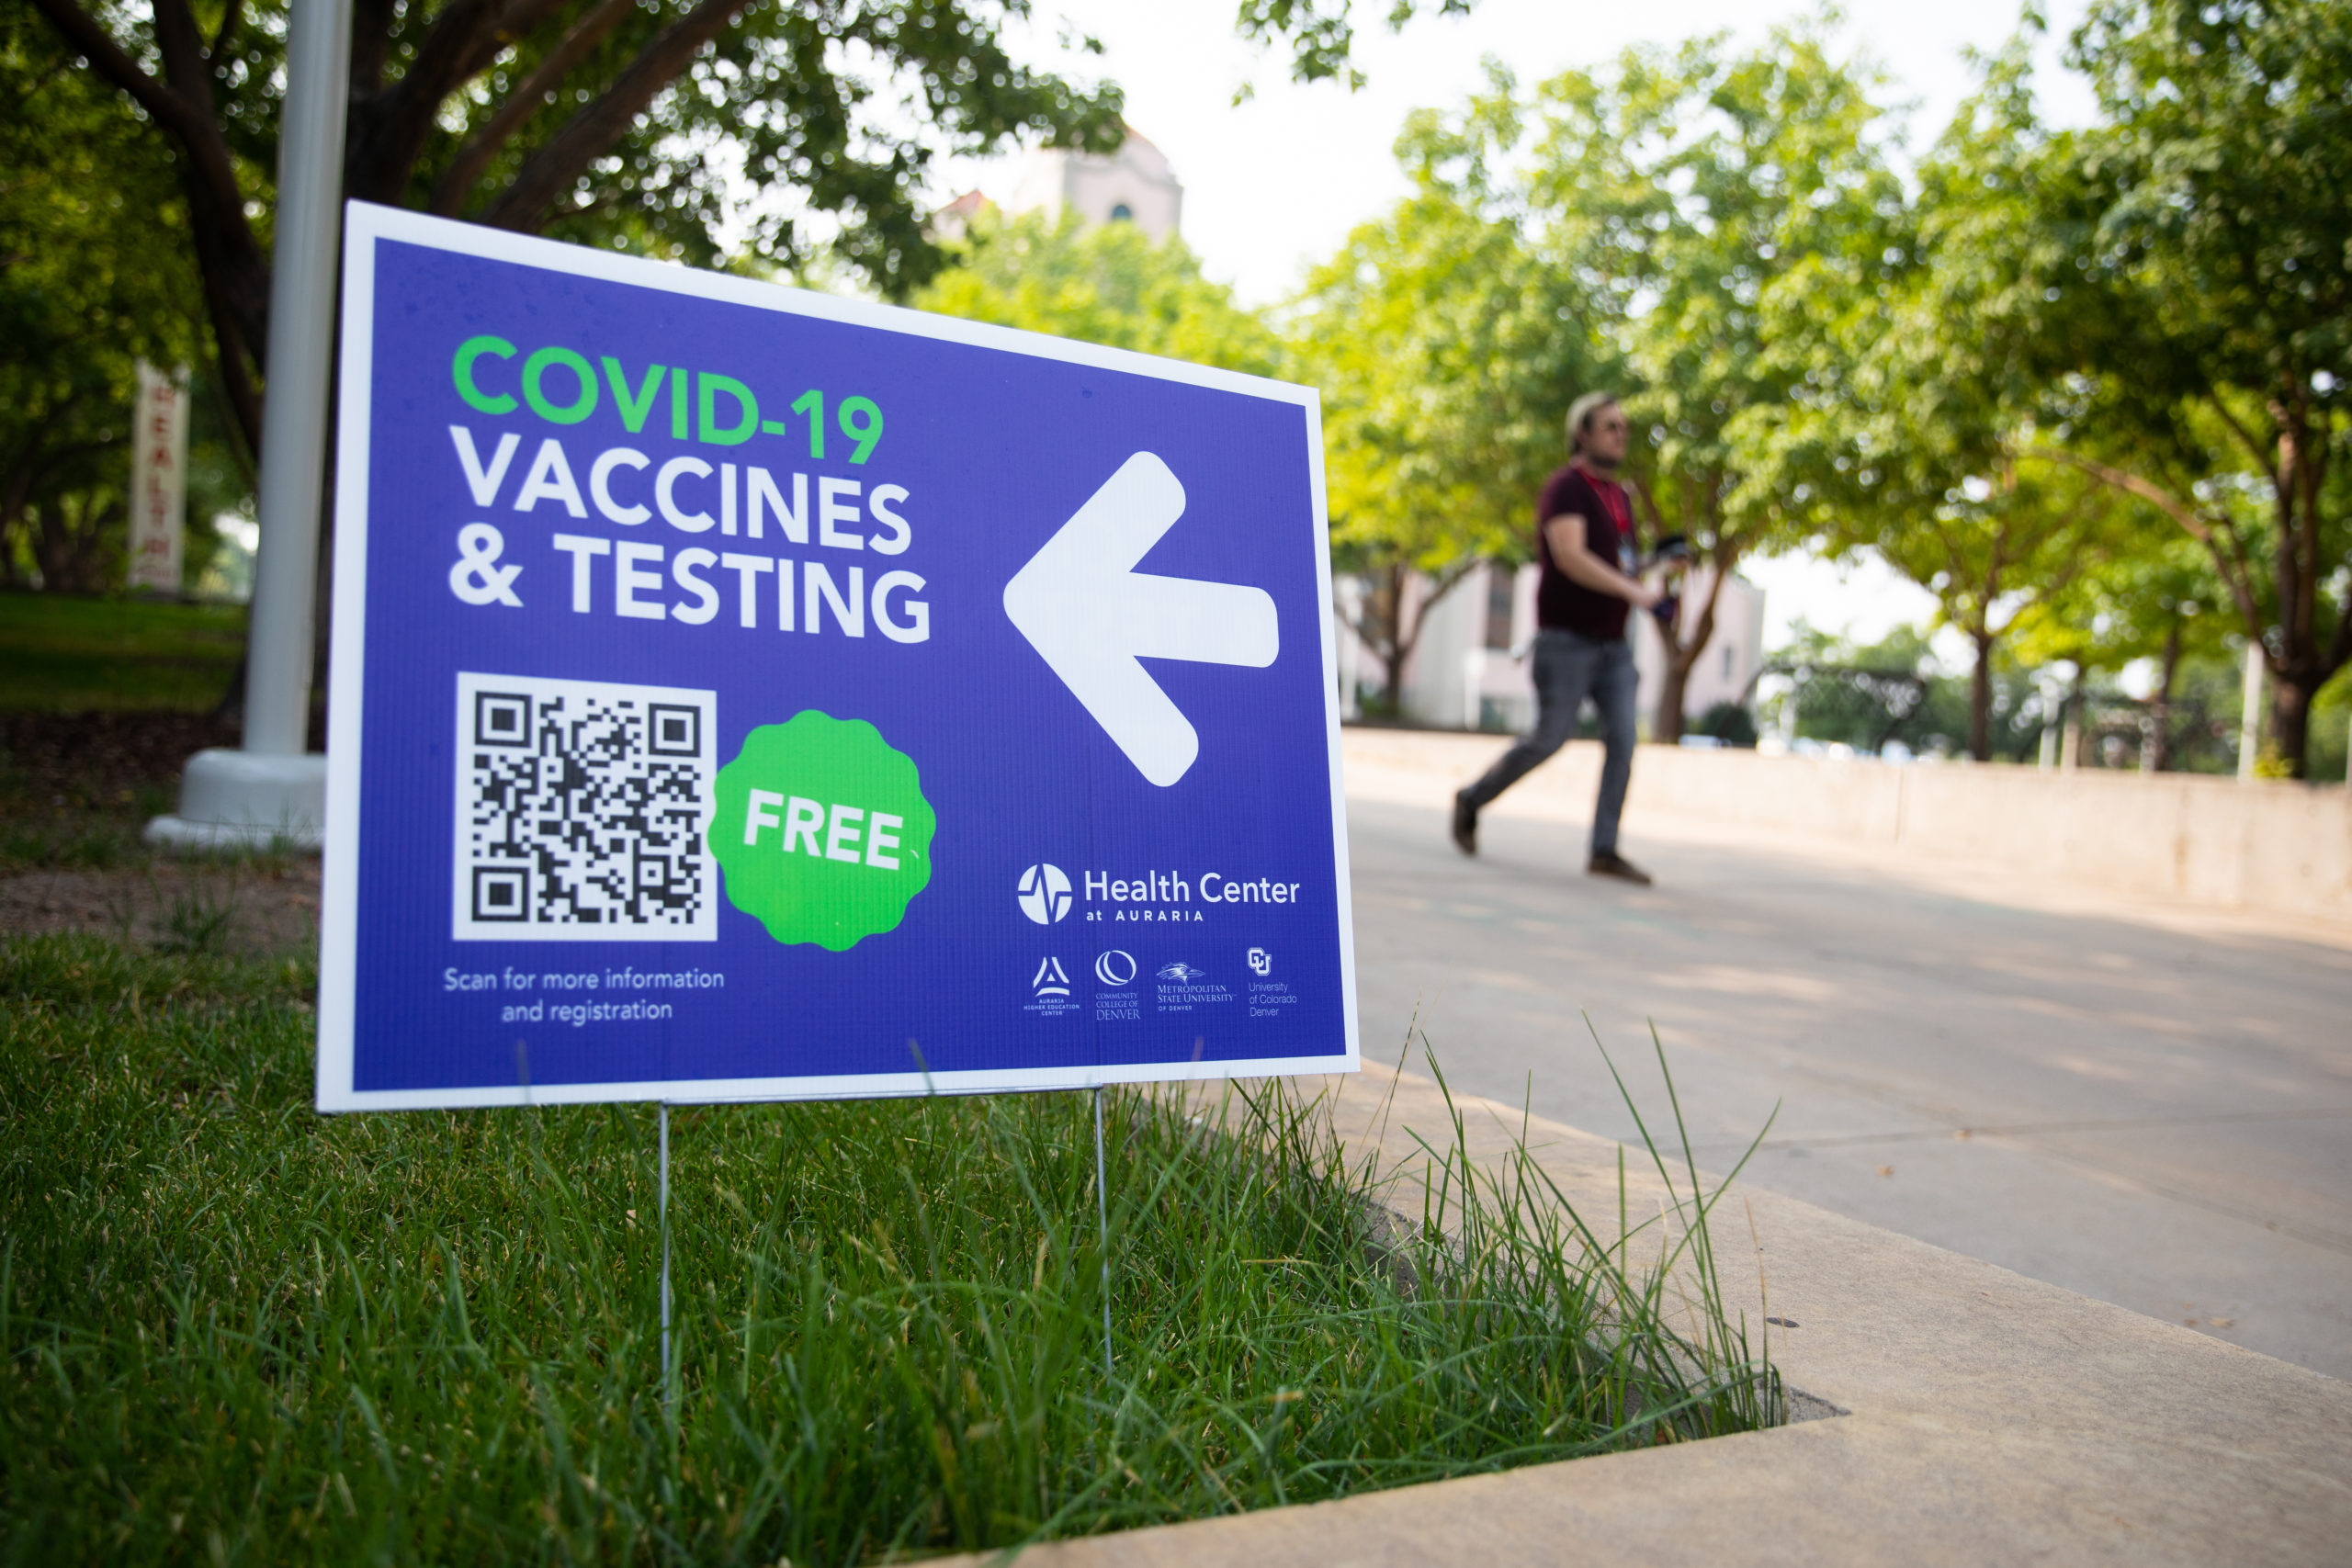 A sign for free COVID-19 vaccines and testing at the Health center at Auraria.